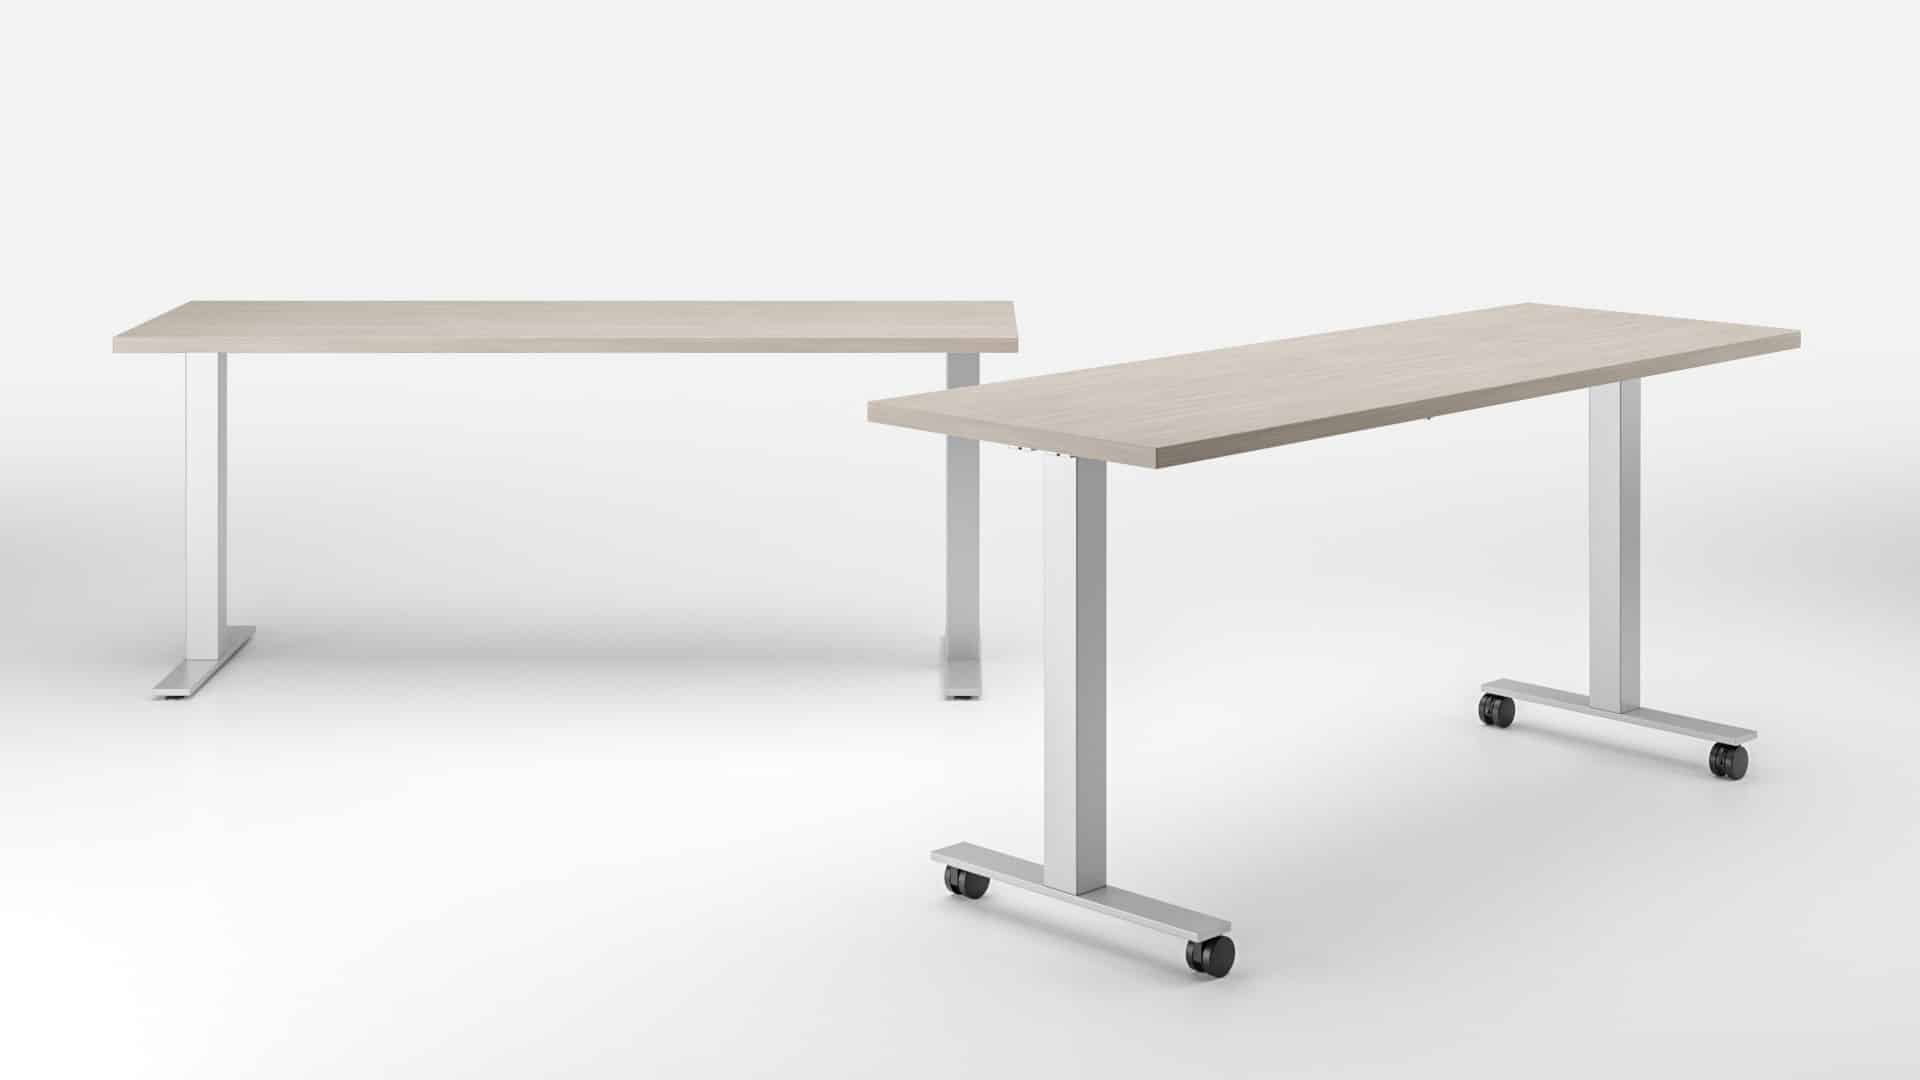 Empire training tables - thin rectangular, on casters and not on casters